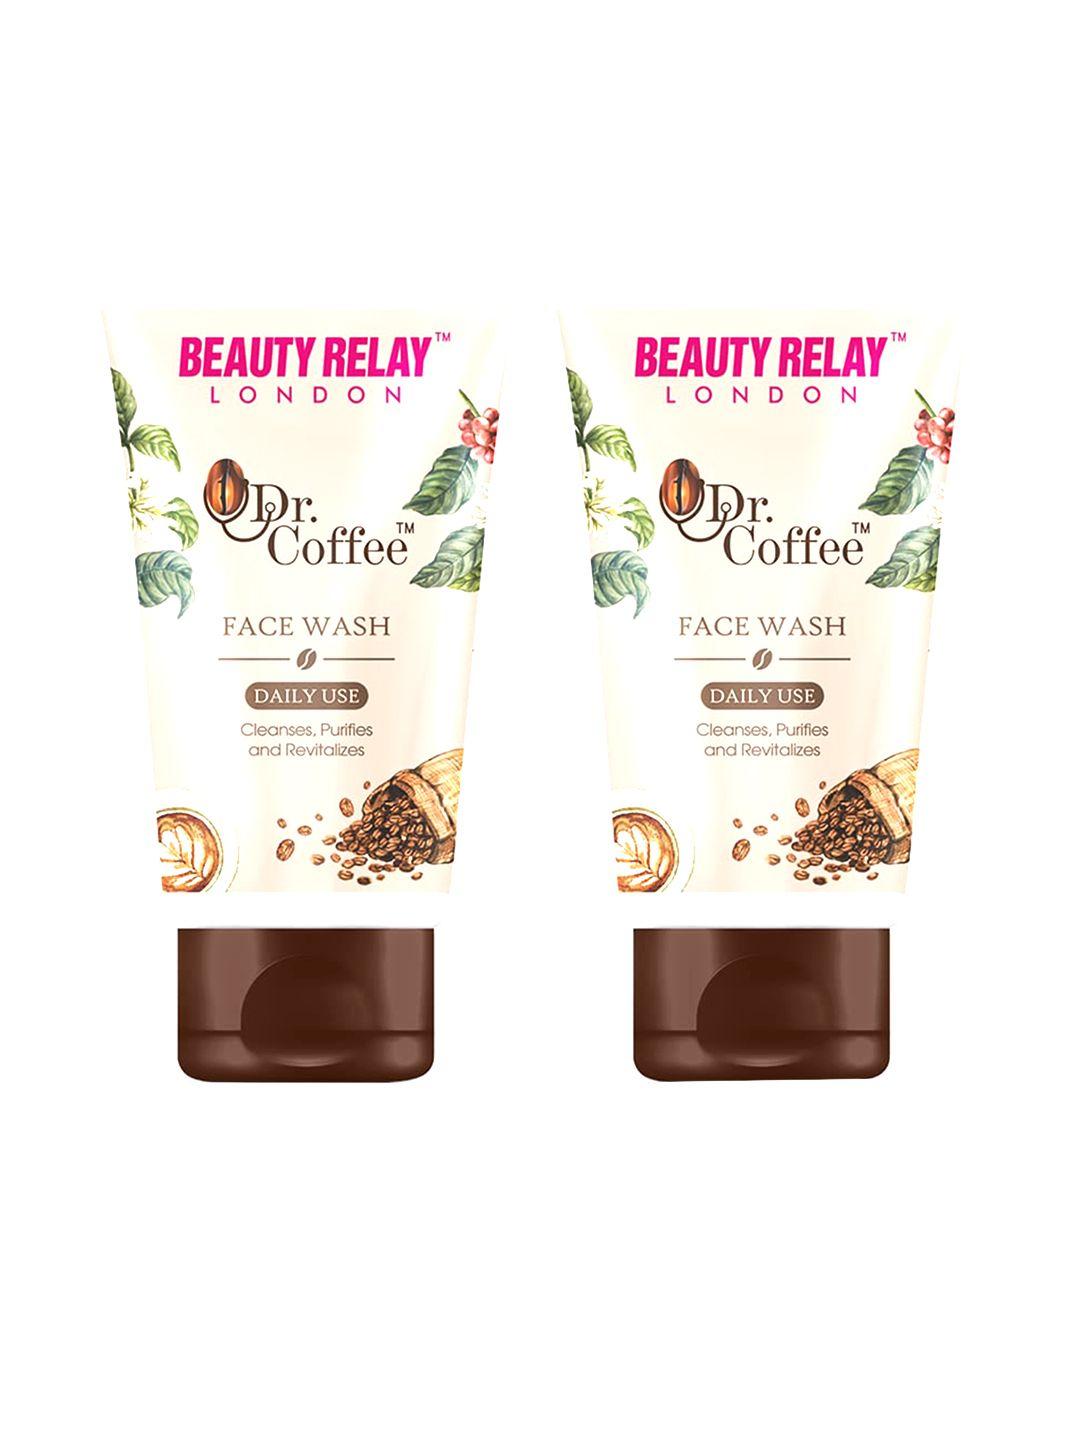 beautyrelay london dr. coffee face wash 200 ml each - buy 1 get 1 free